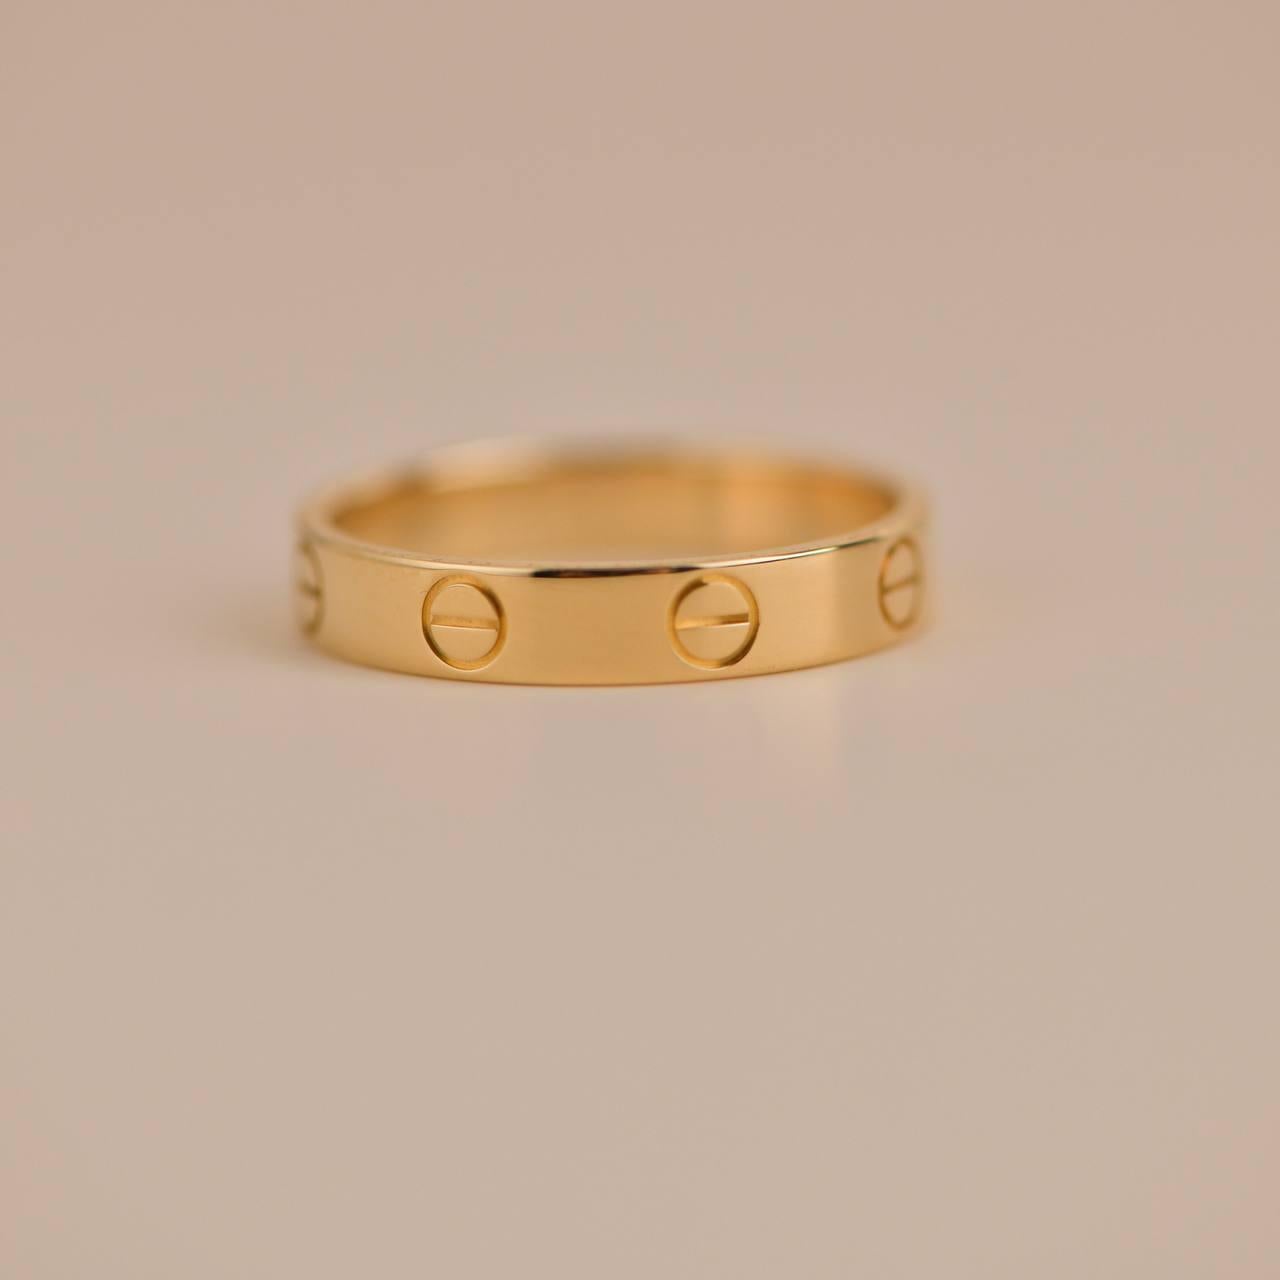 Women's or Men's Cartier Love Wedding Band Ring Yellow Gold Size 54